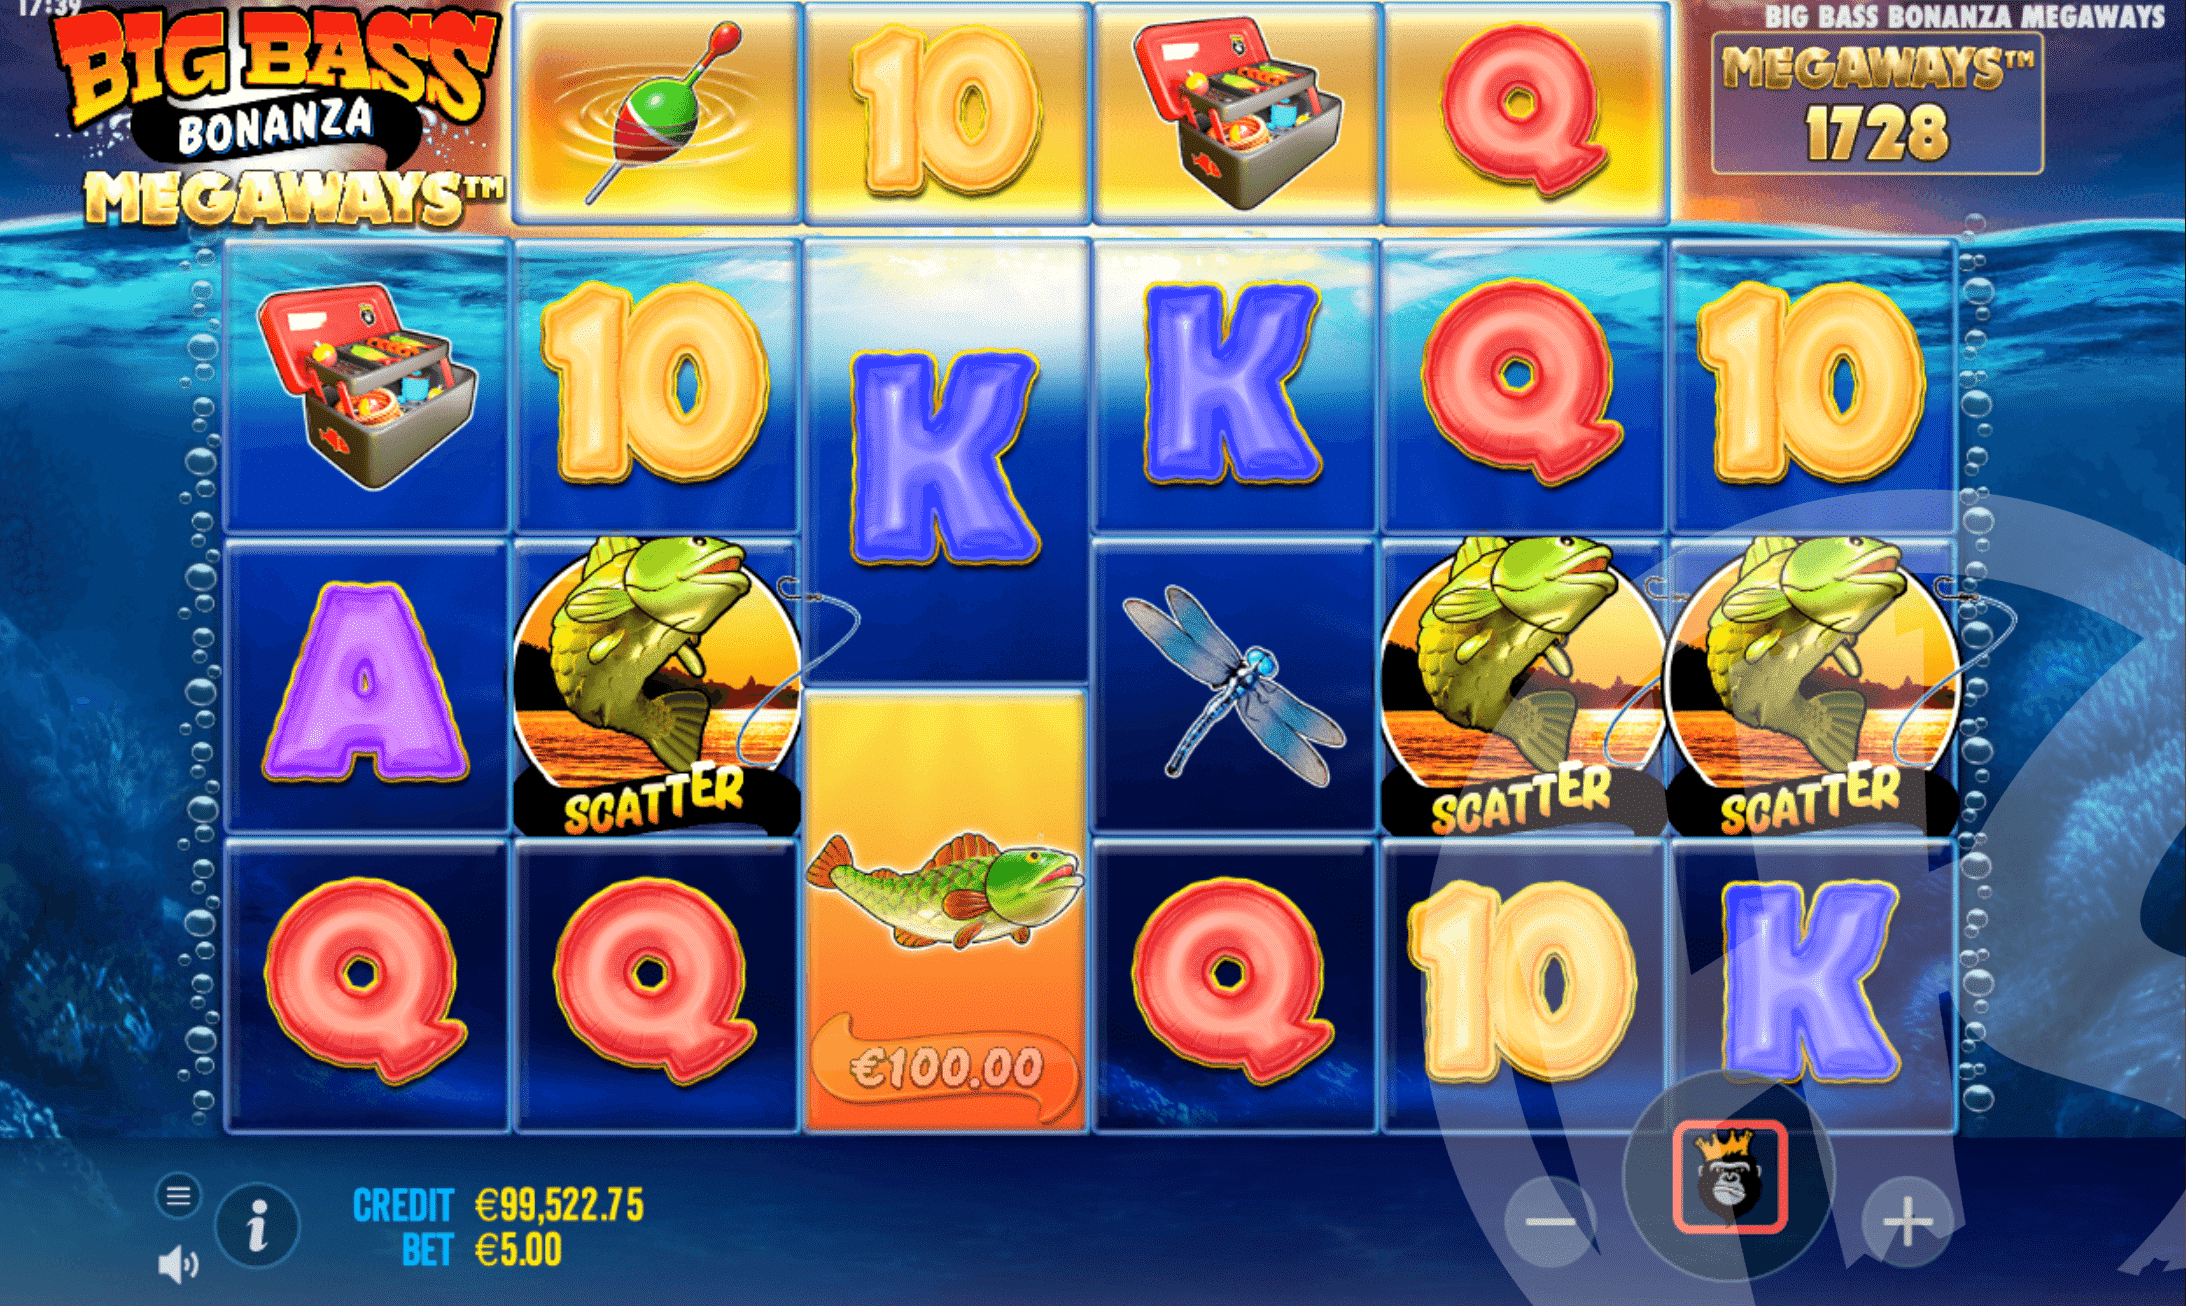 3 or More Scatters Trigger Free Spins